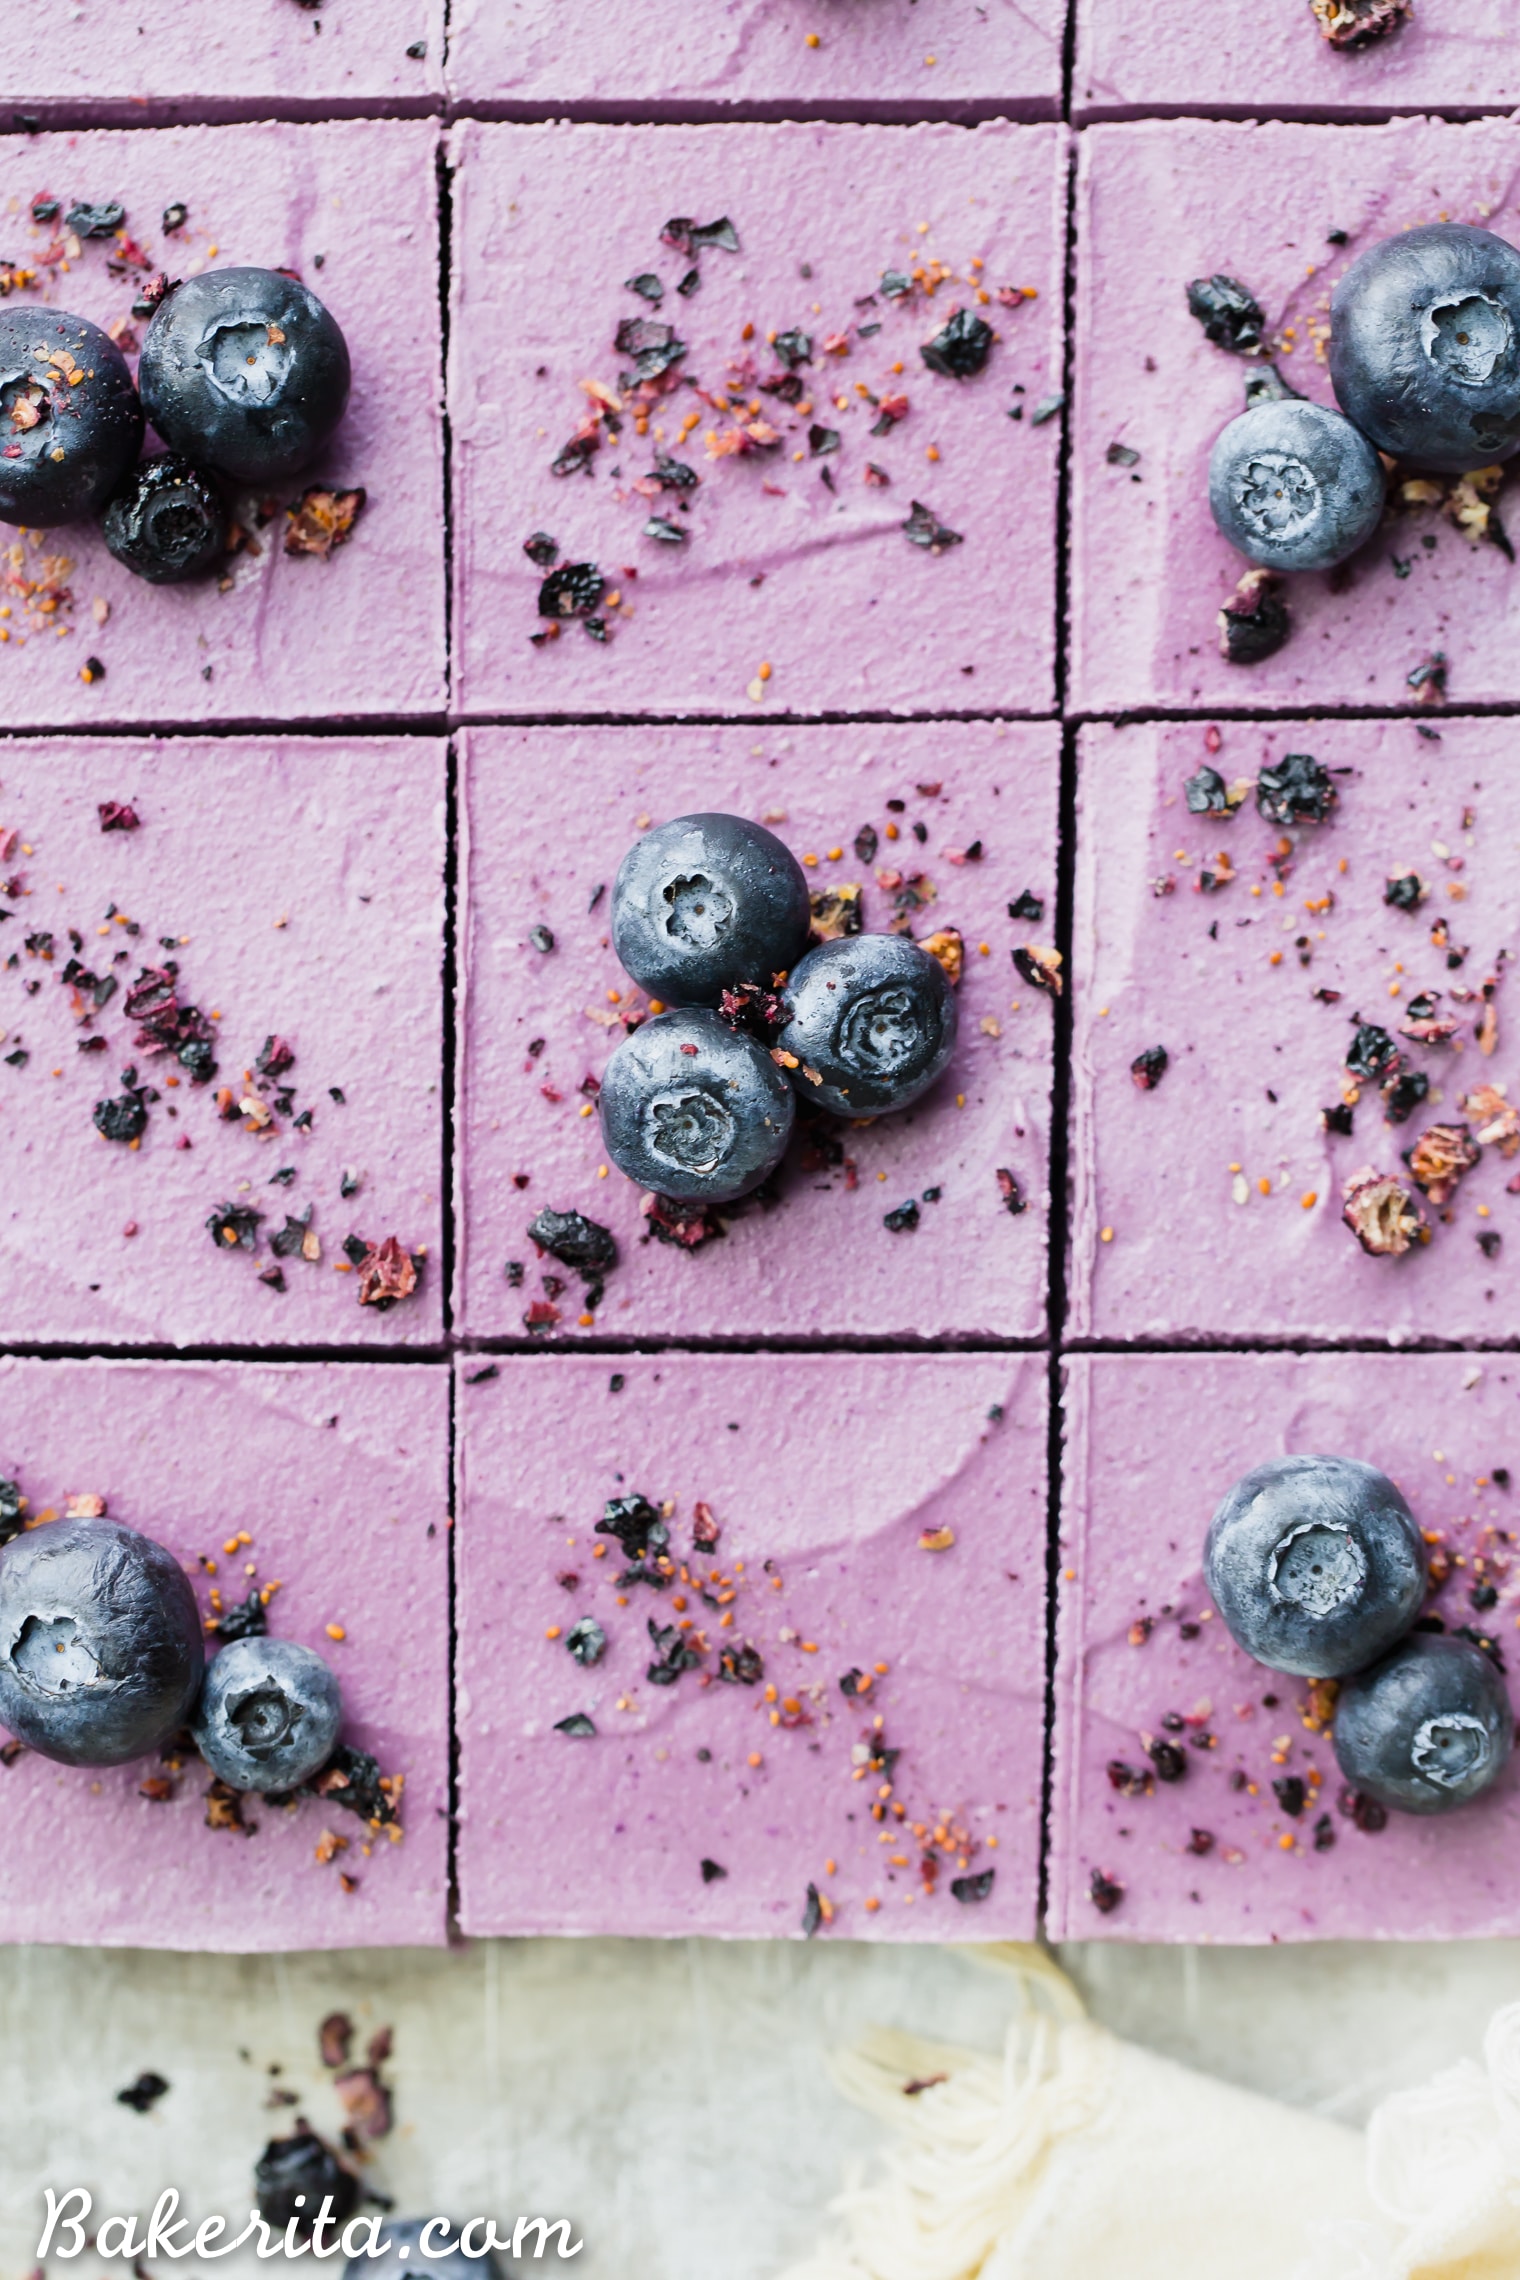 These creamy No-Bake Acai Maqui Berry Bars are full of antioxidants from acai + maqui berry powder - it's a punch of superfood power packed into a healthy and delicious dessert bar! These gluten-free, paleo and vegan bars are so refreshing - no baking necessary.